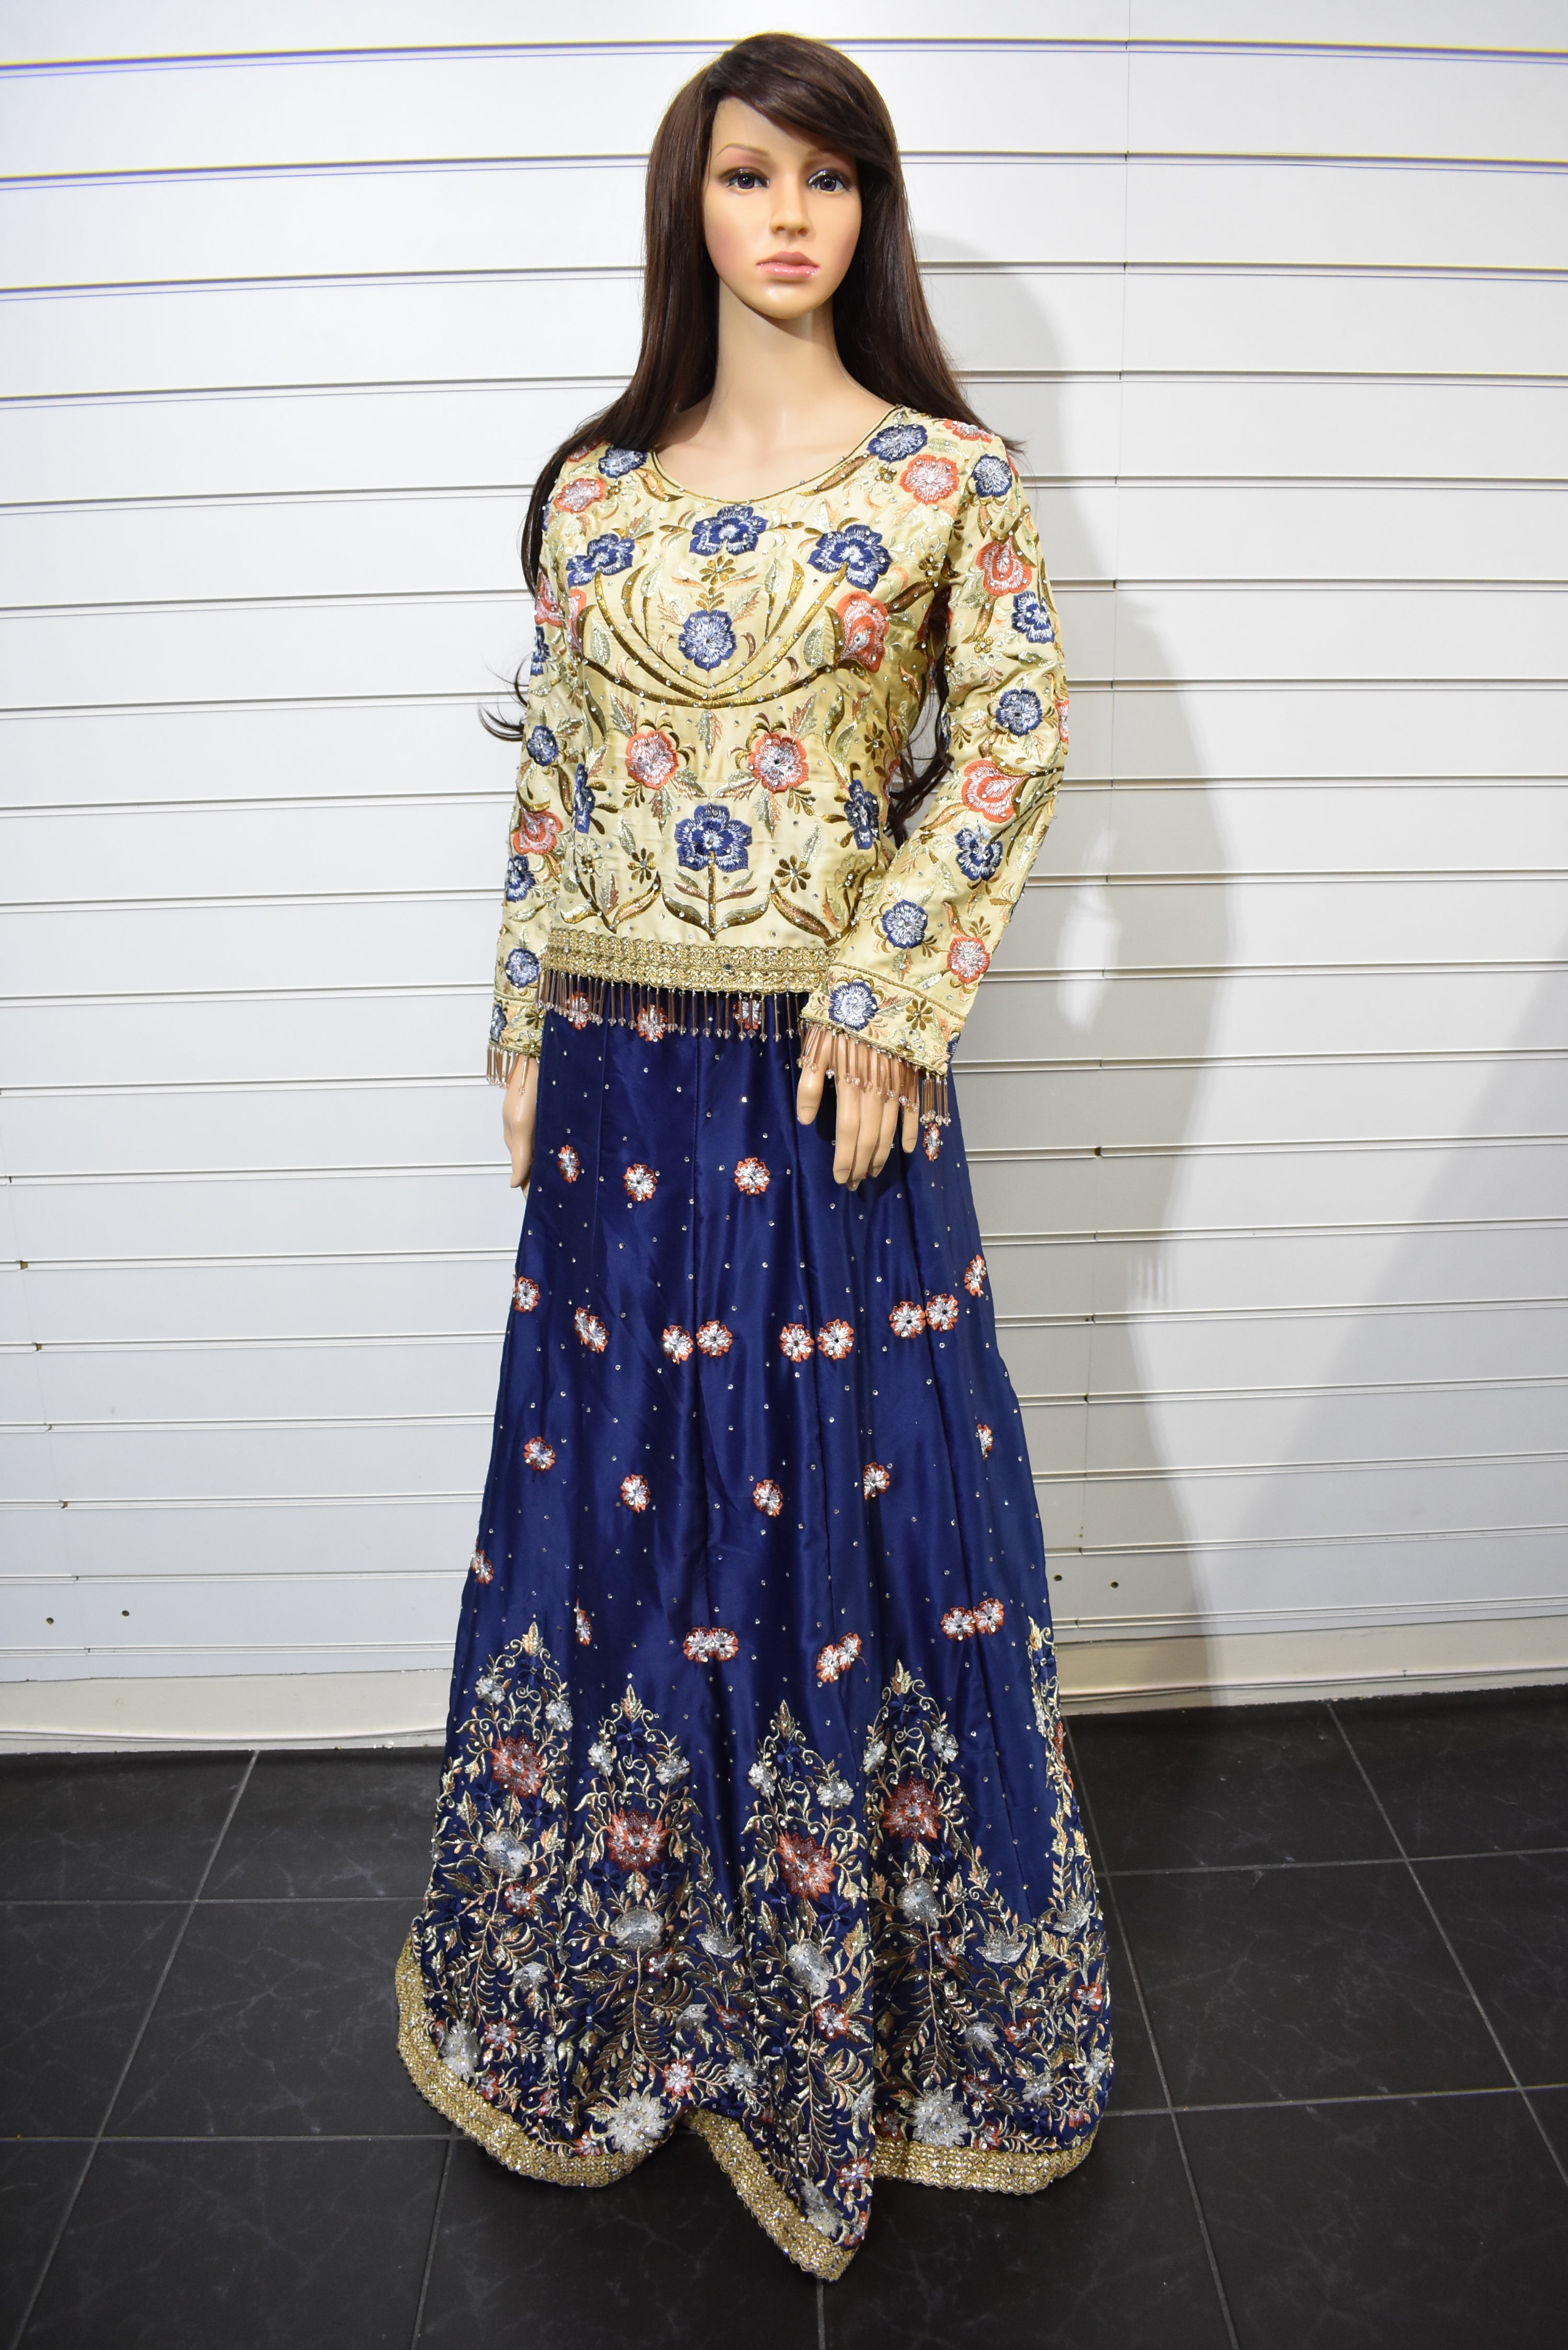 Stunning Cream and Blue Embroidered Lengha Outfit